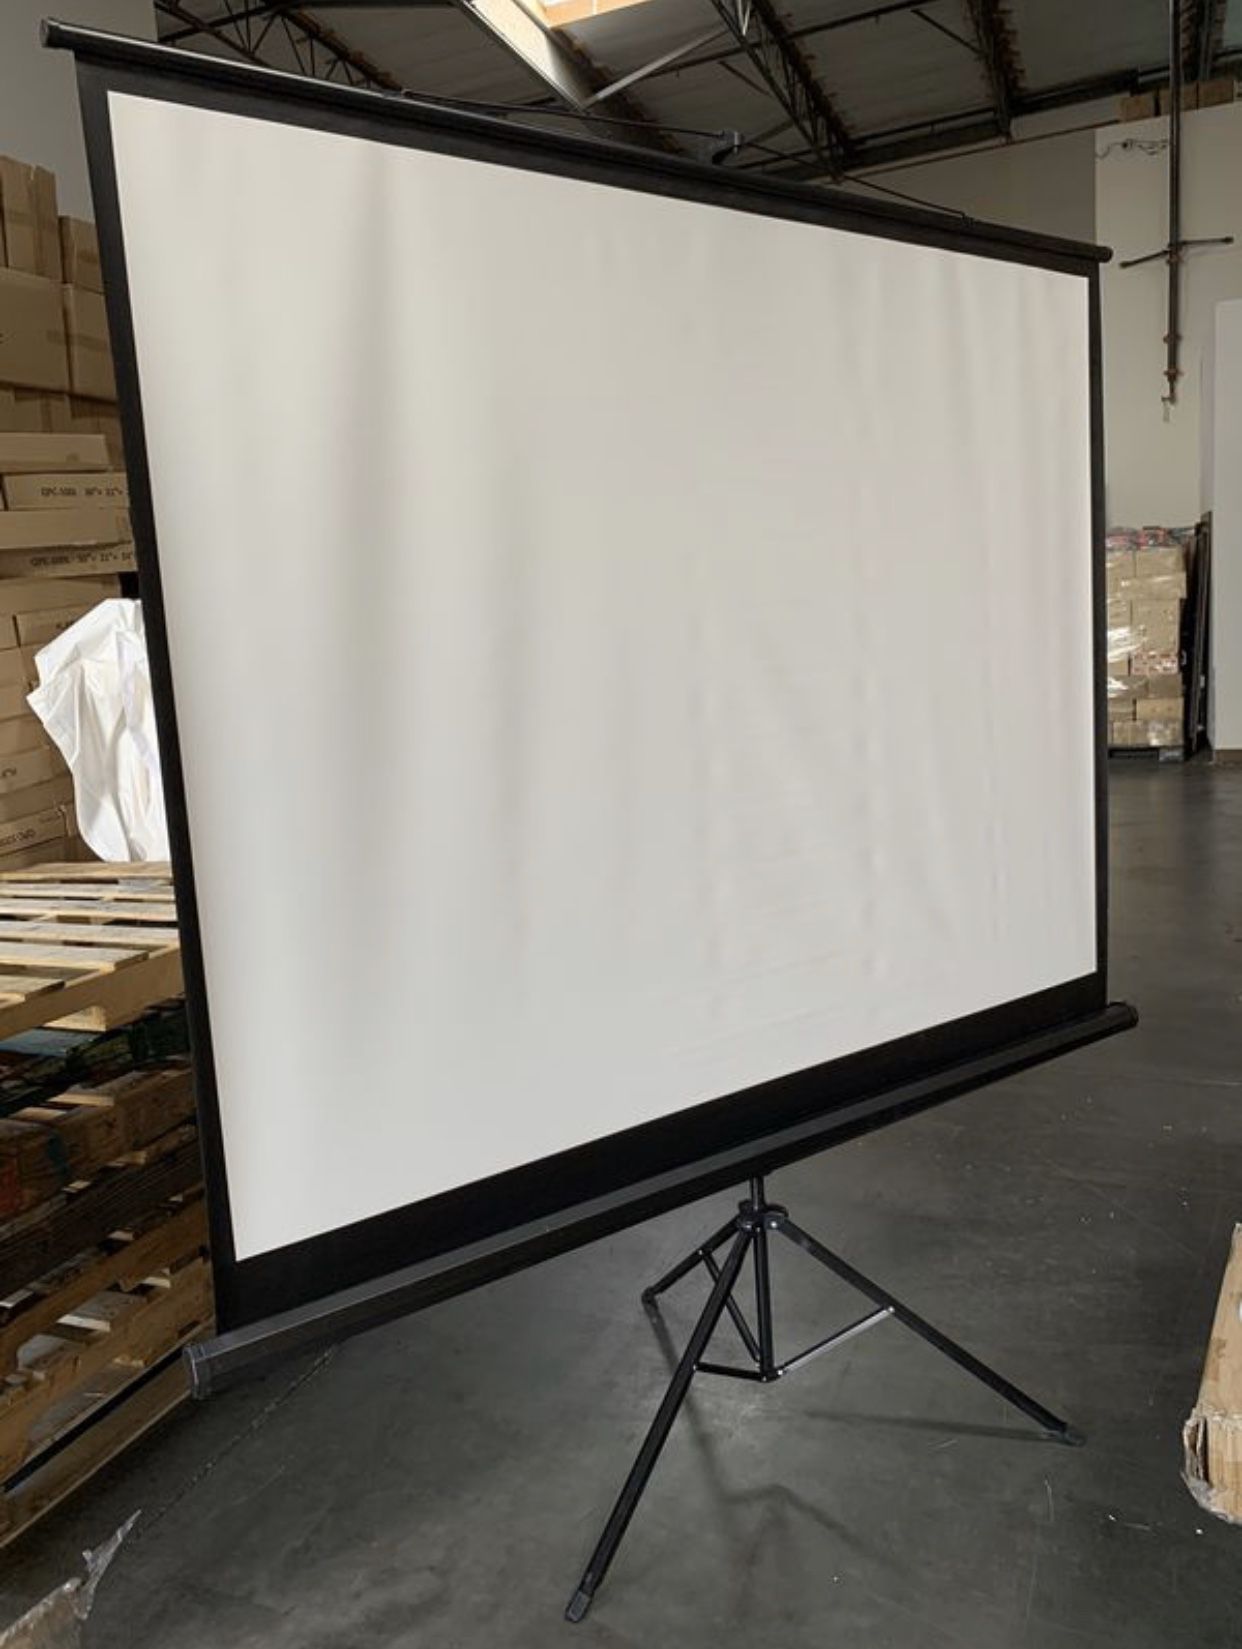 84-inch projector screen with stand